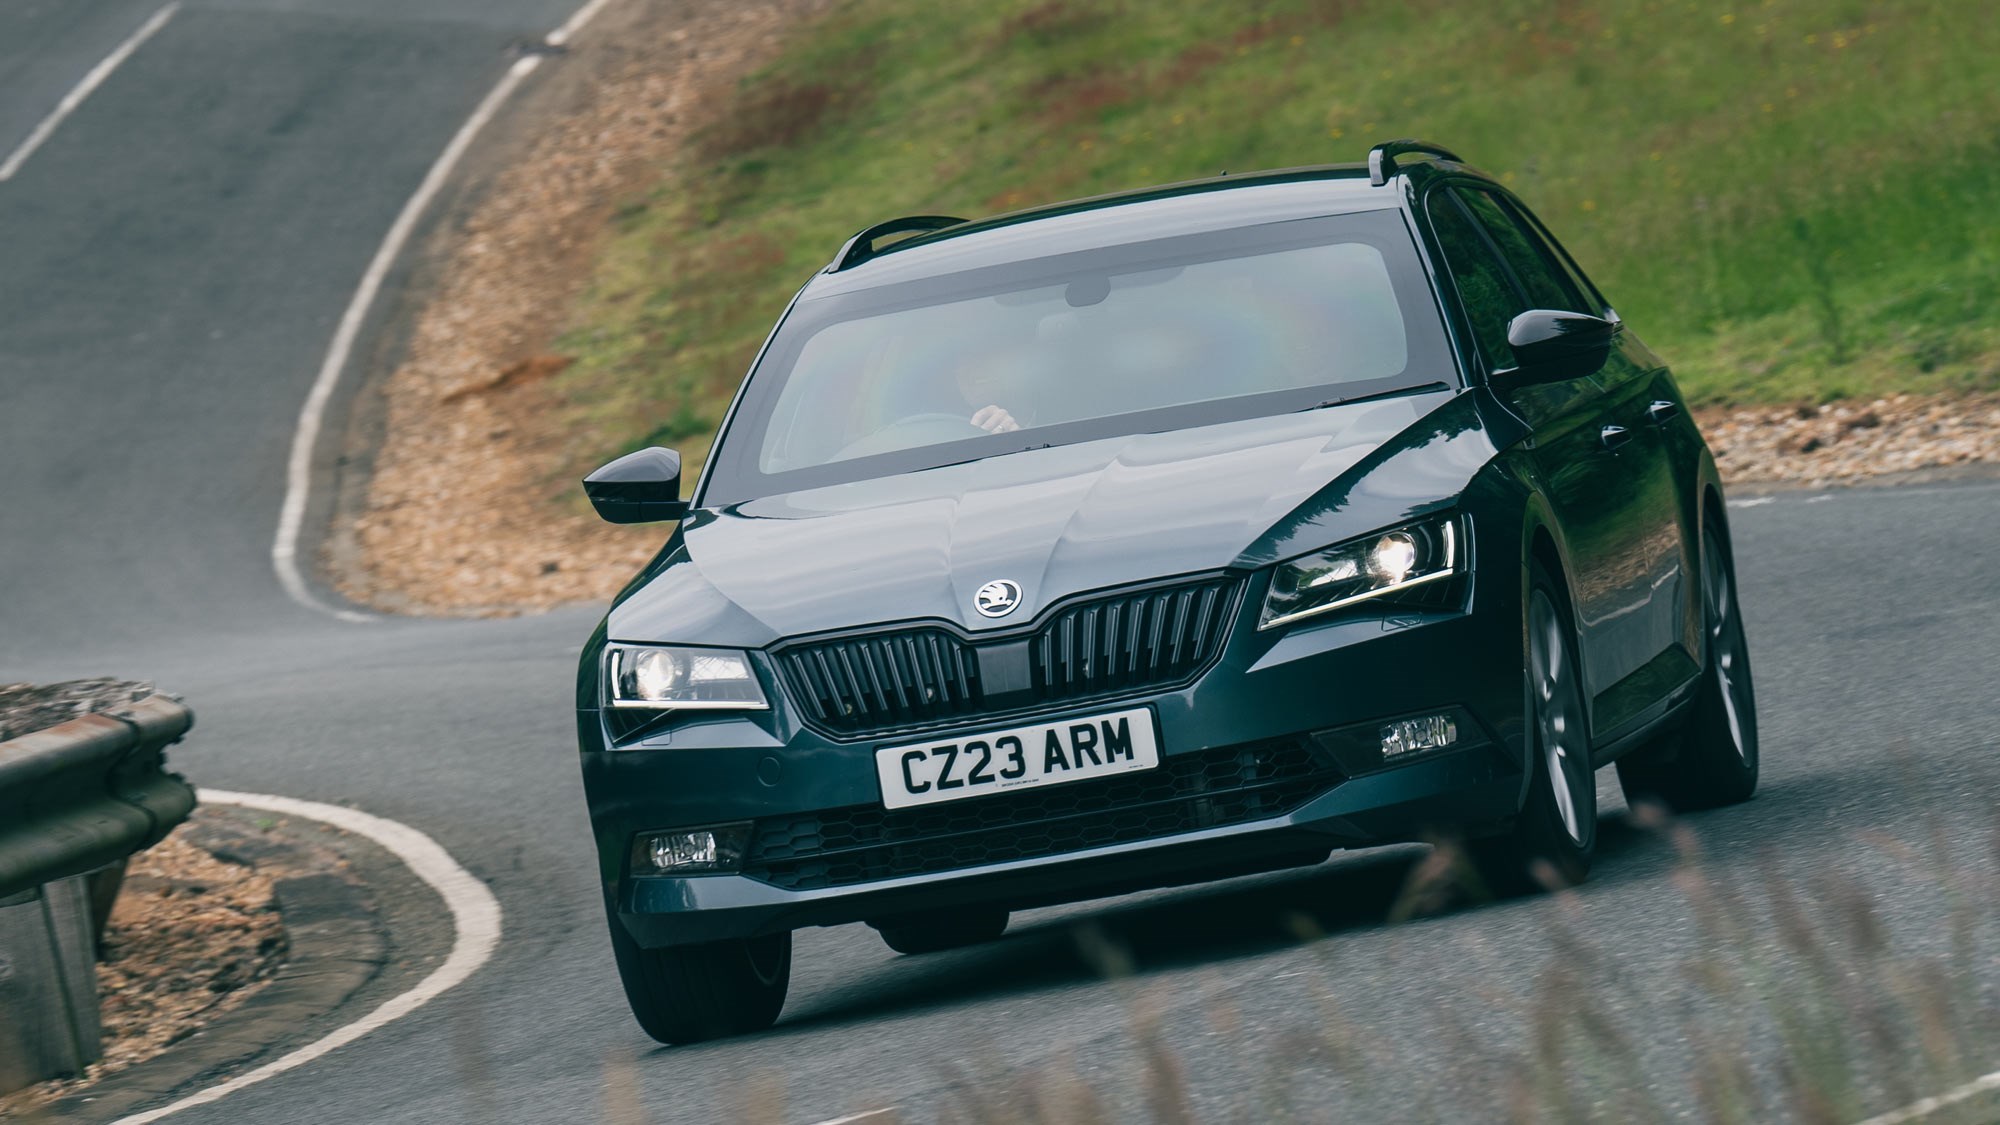 All tooled up: we drive the Skoda Superb Armoured Edition